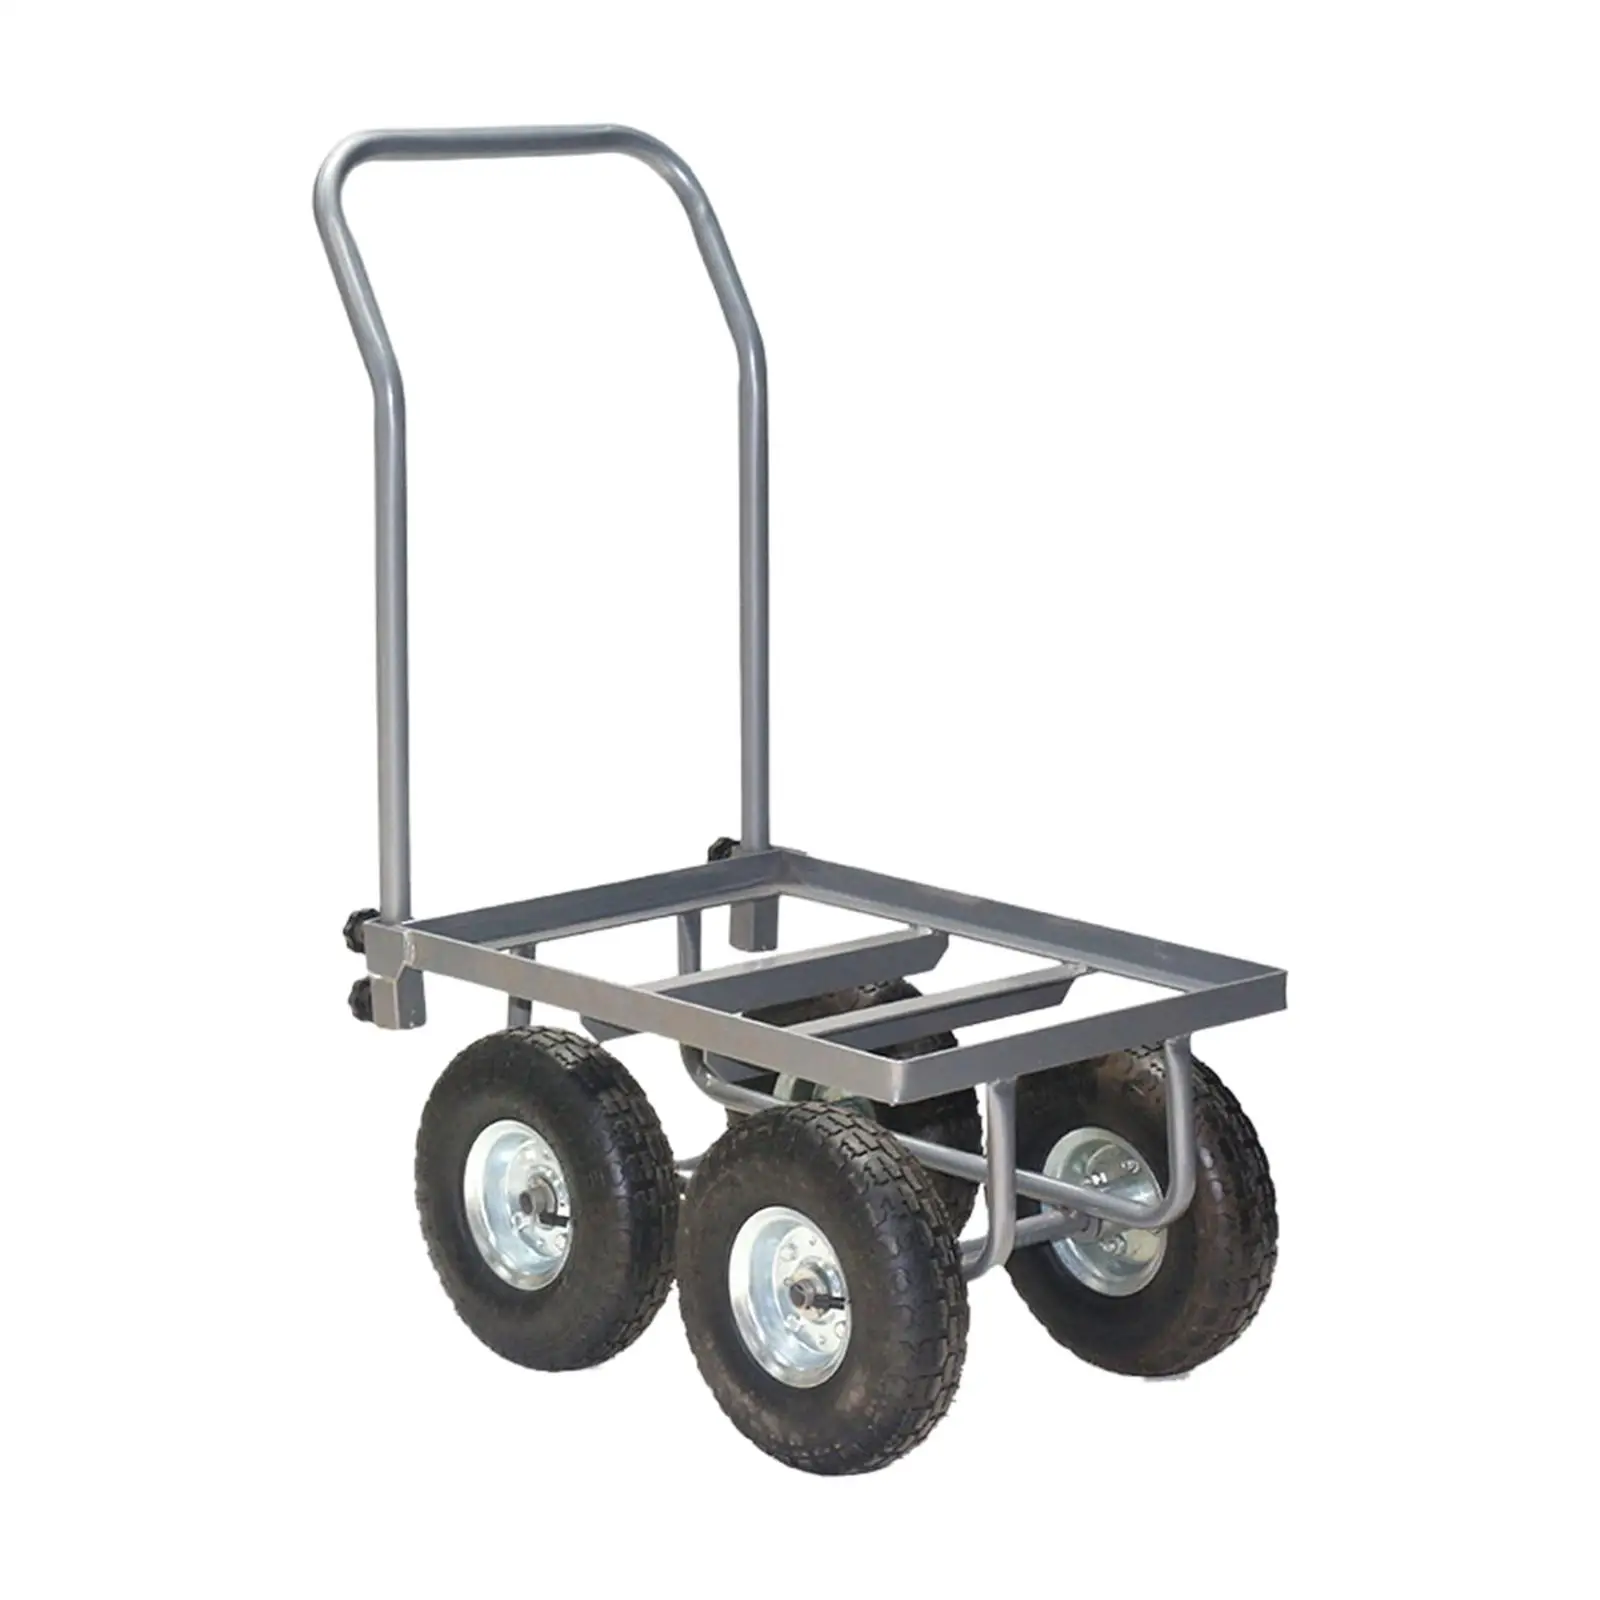 Platform Truck, 264lbs Folding Hand Truck Heavy Duty 4 Wheel Platform Cart Collapsible for Luggage Moving Use